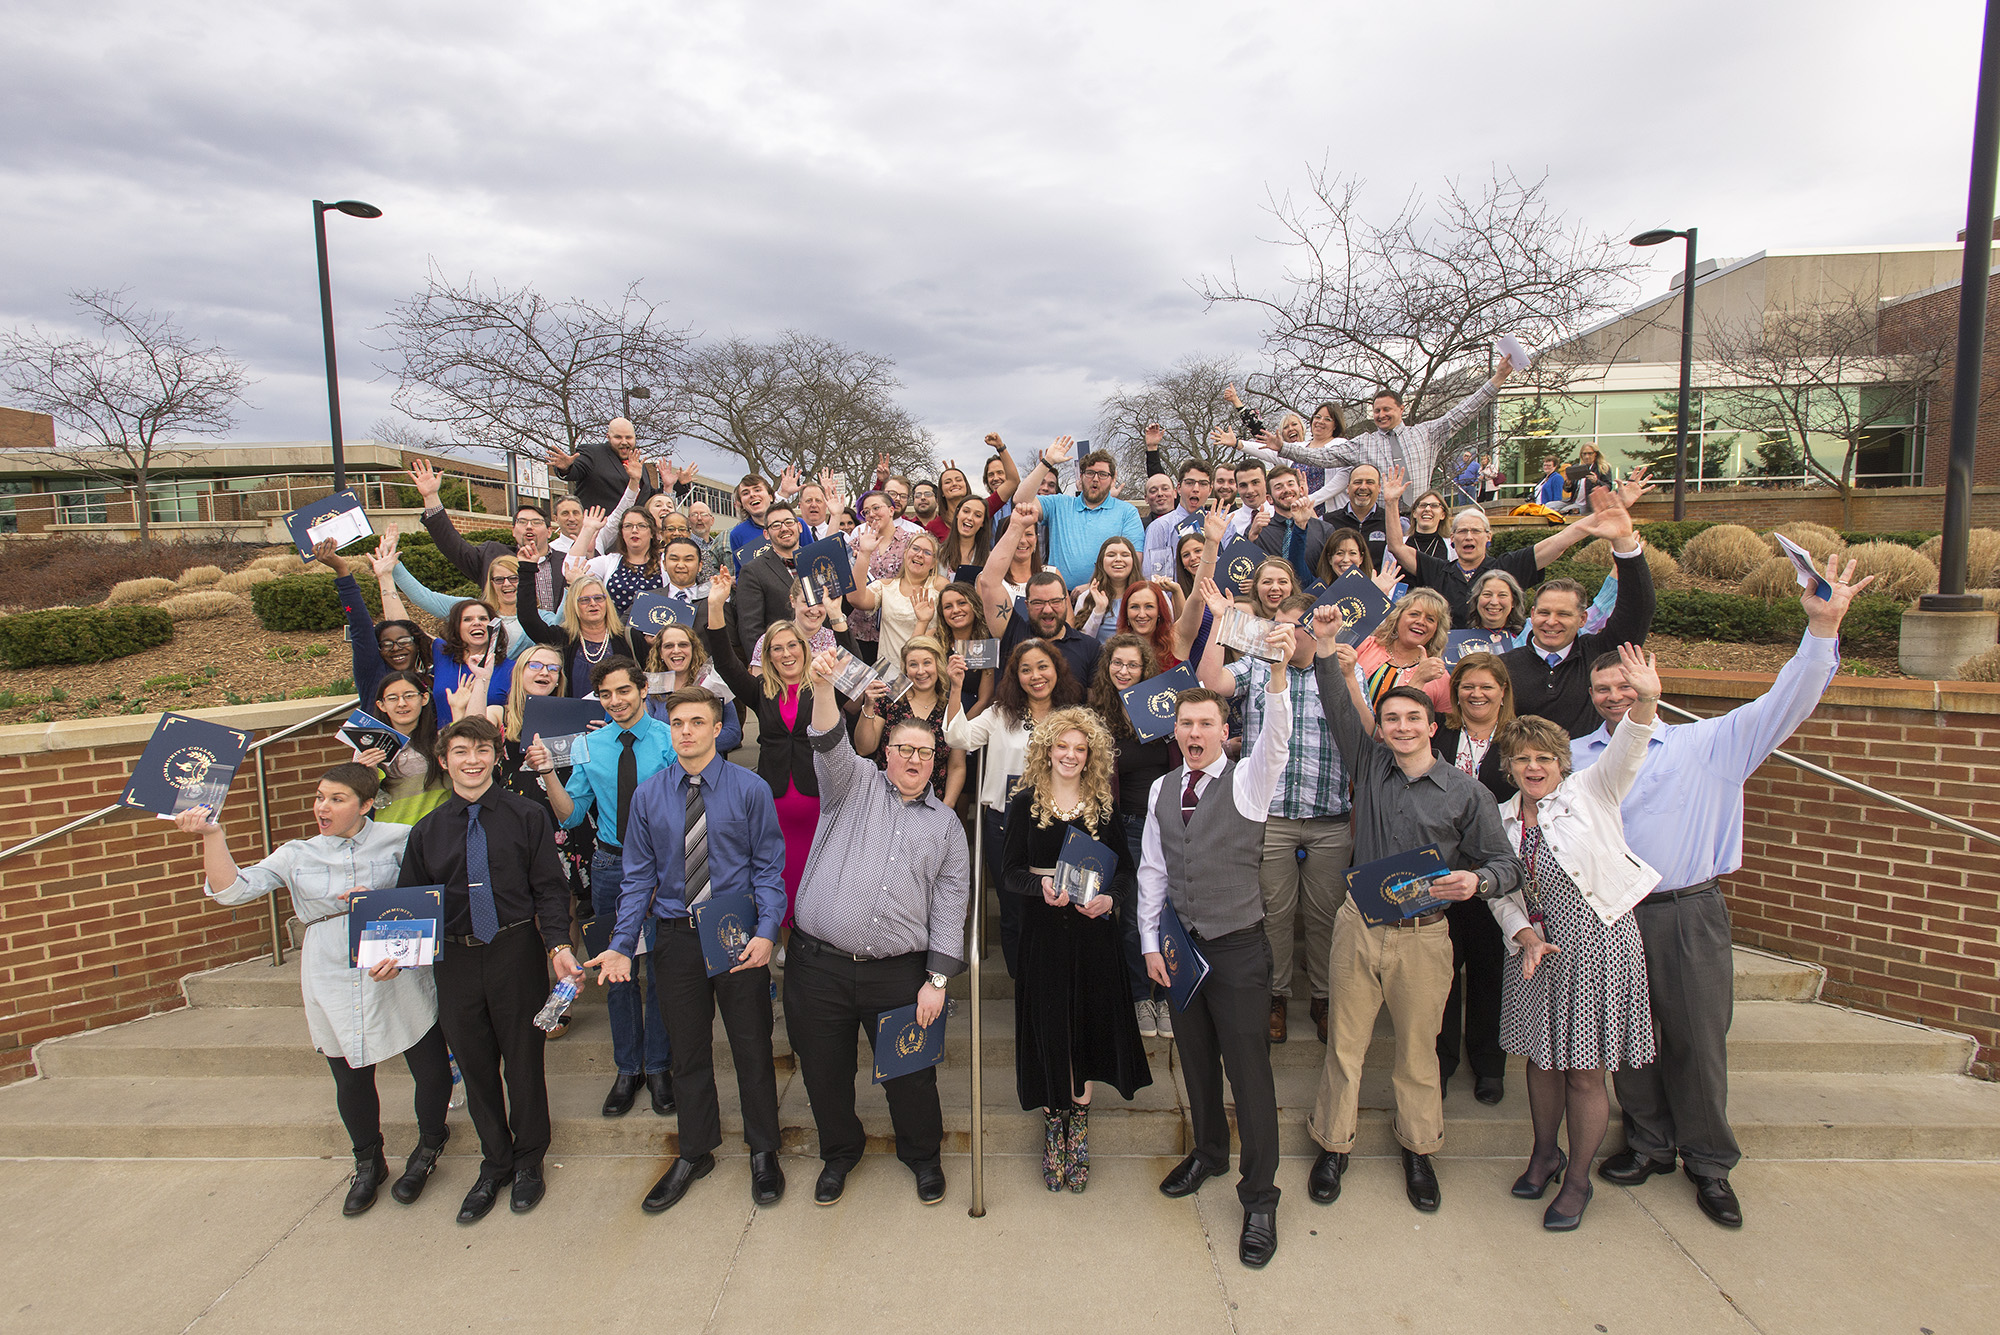 A group photo of KCC's 2019 Outstanding Bruin Award winners and presenters celebrating on the steps at the front of KCC's North Avenue campus in Battle Creek.